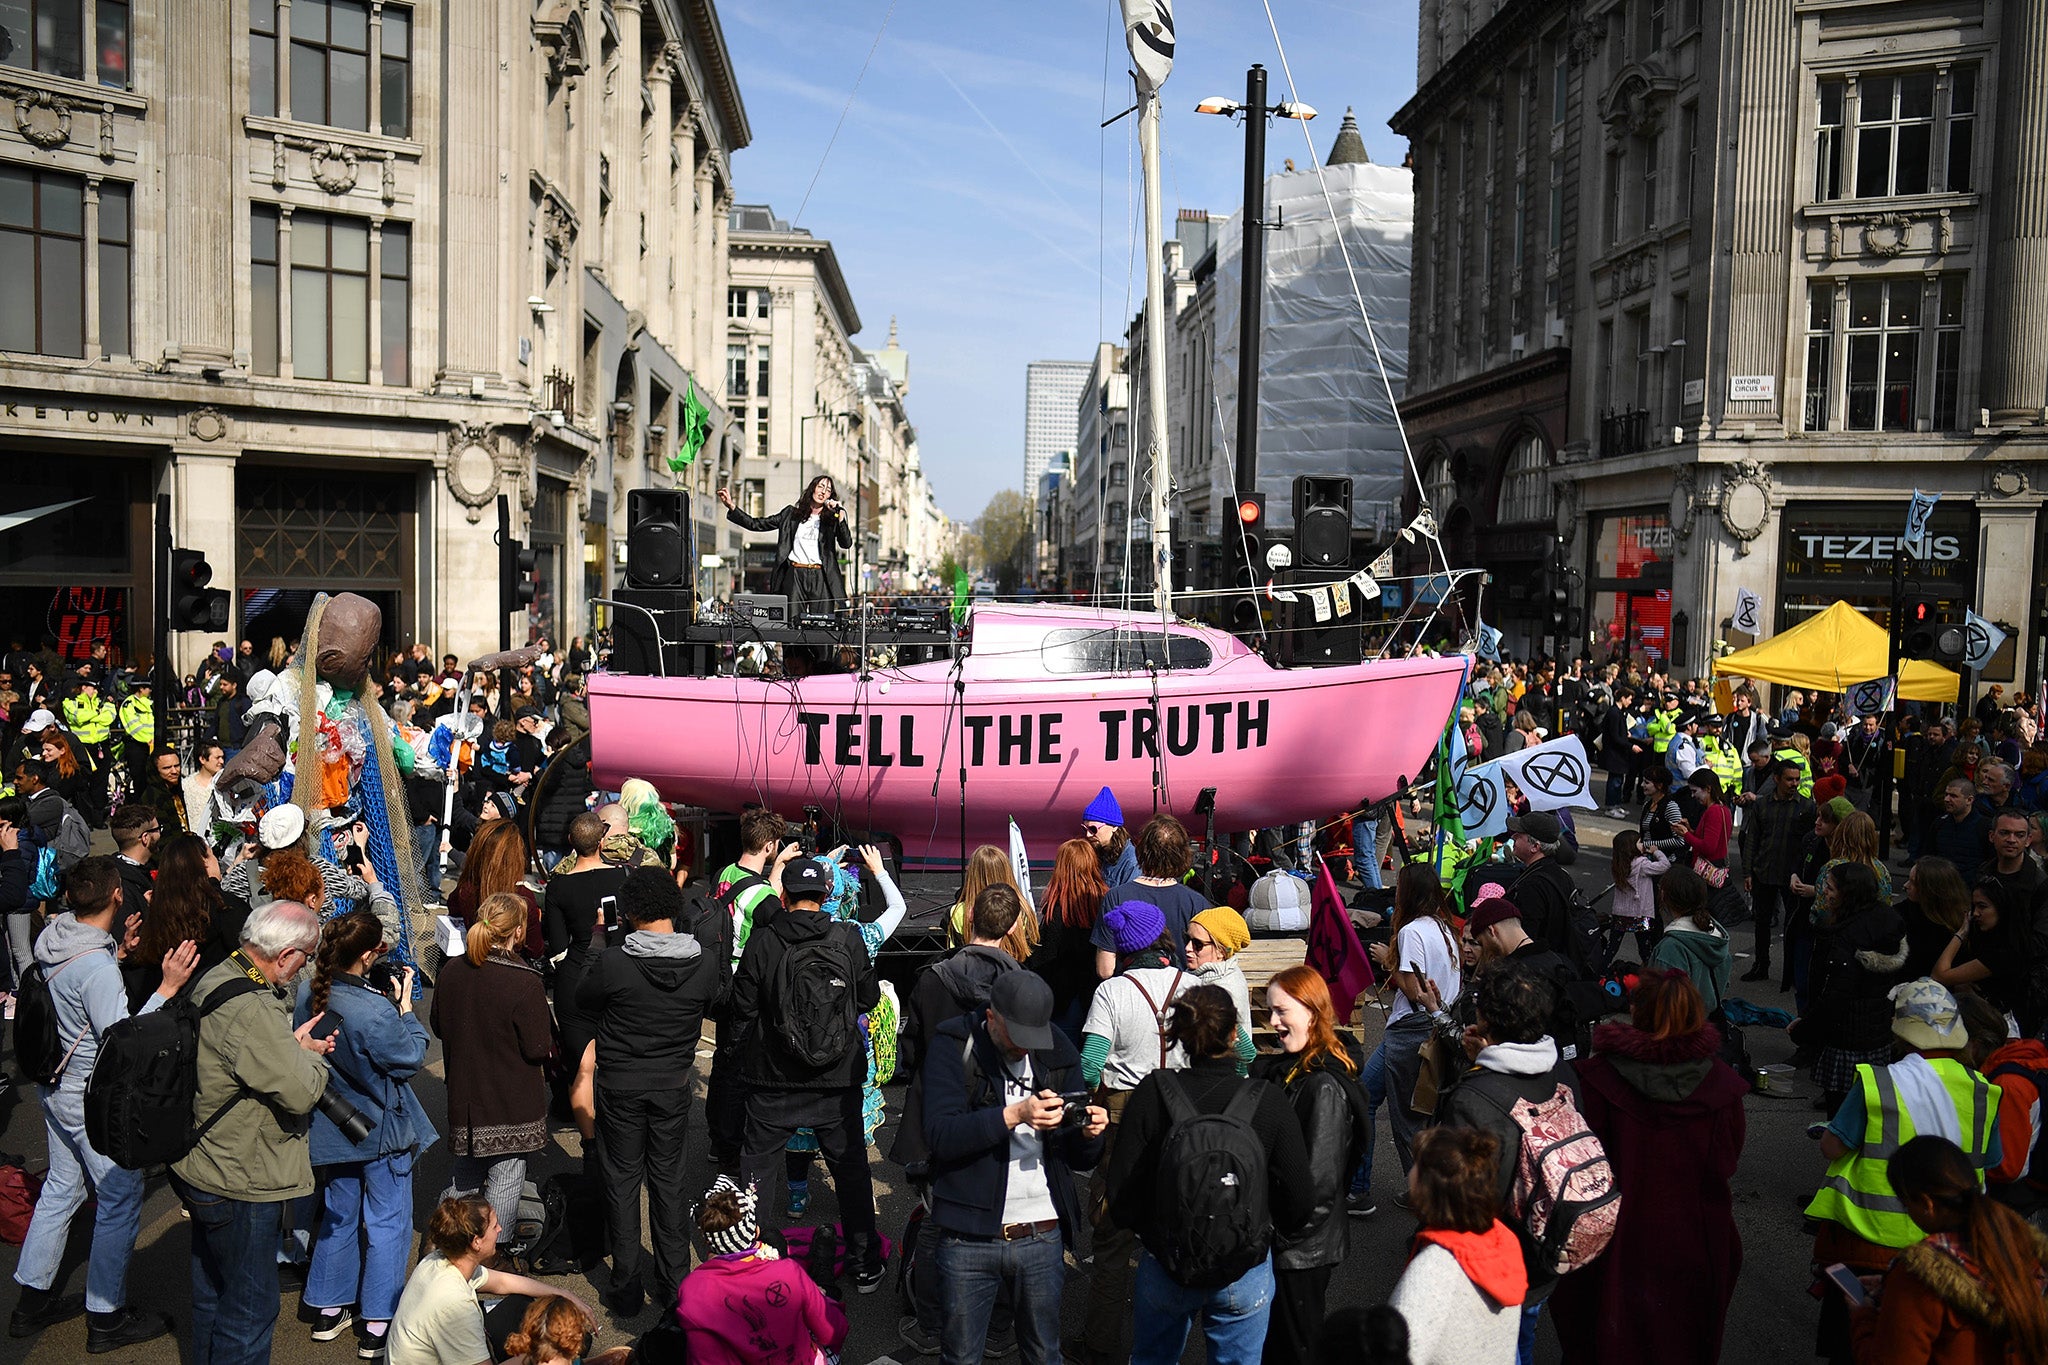 Extinction Rebellion has upped the ante, pushing for a state of emergency on climate